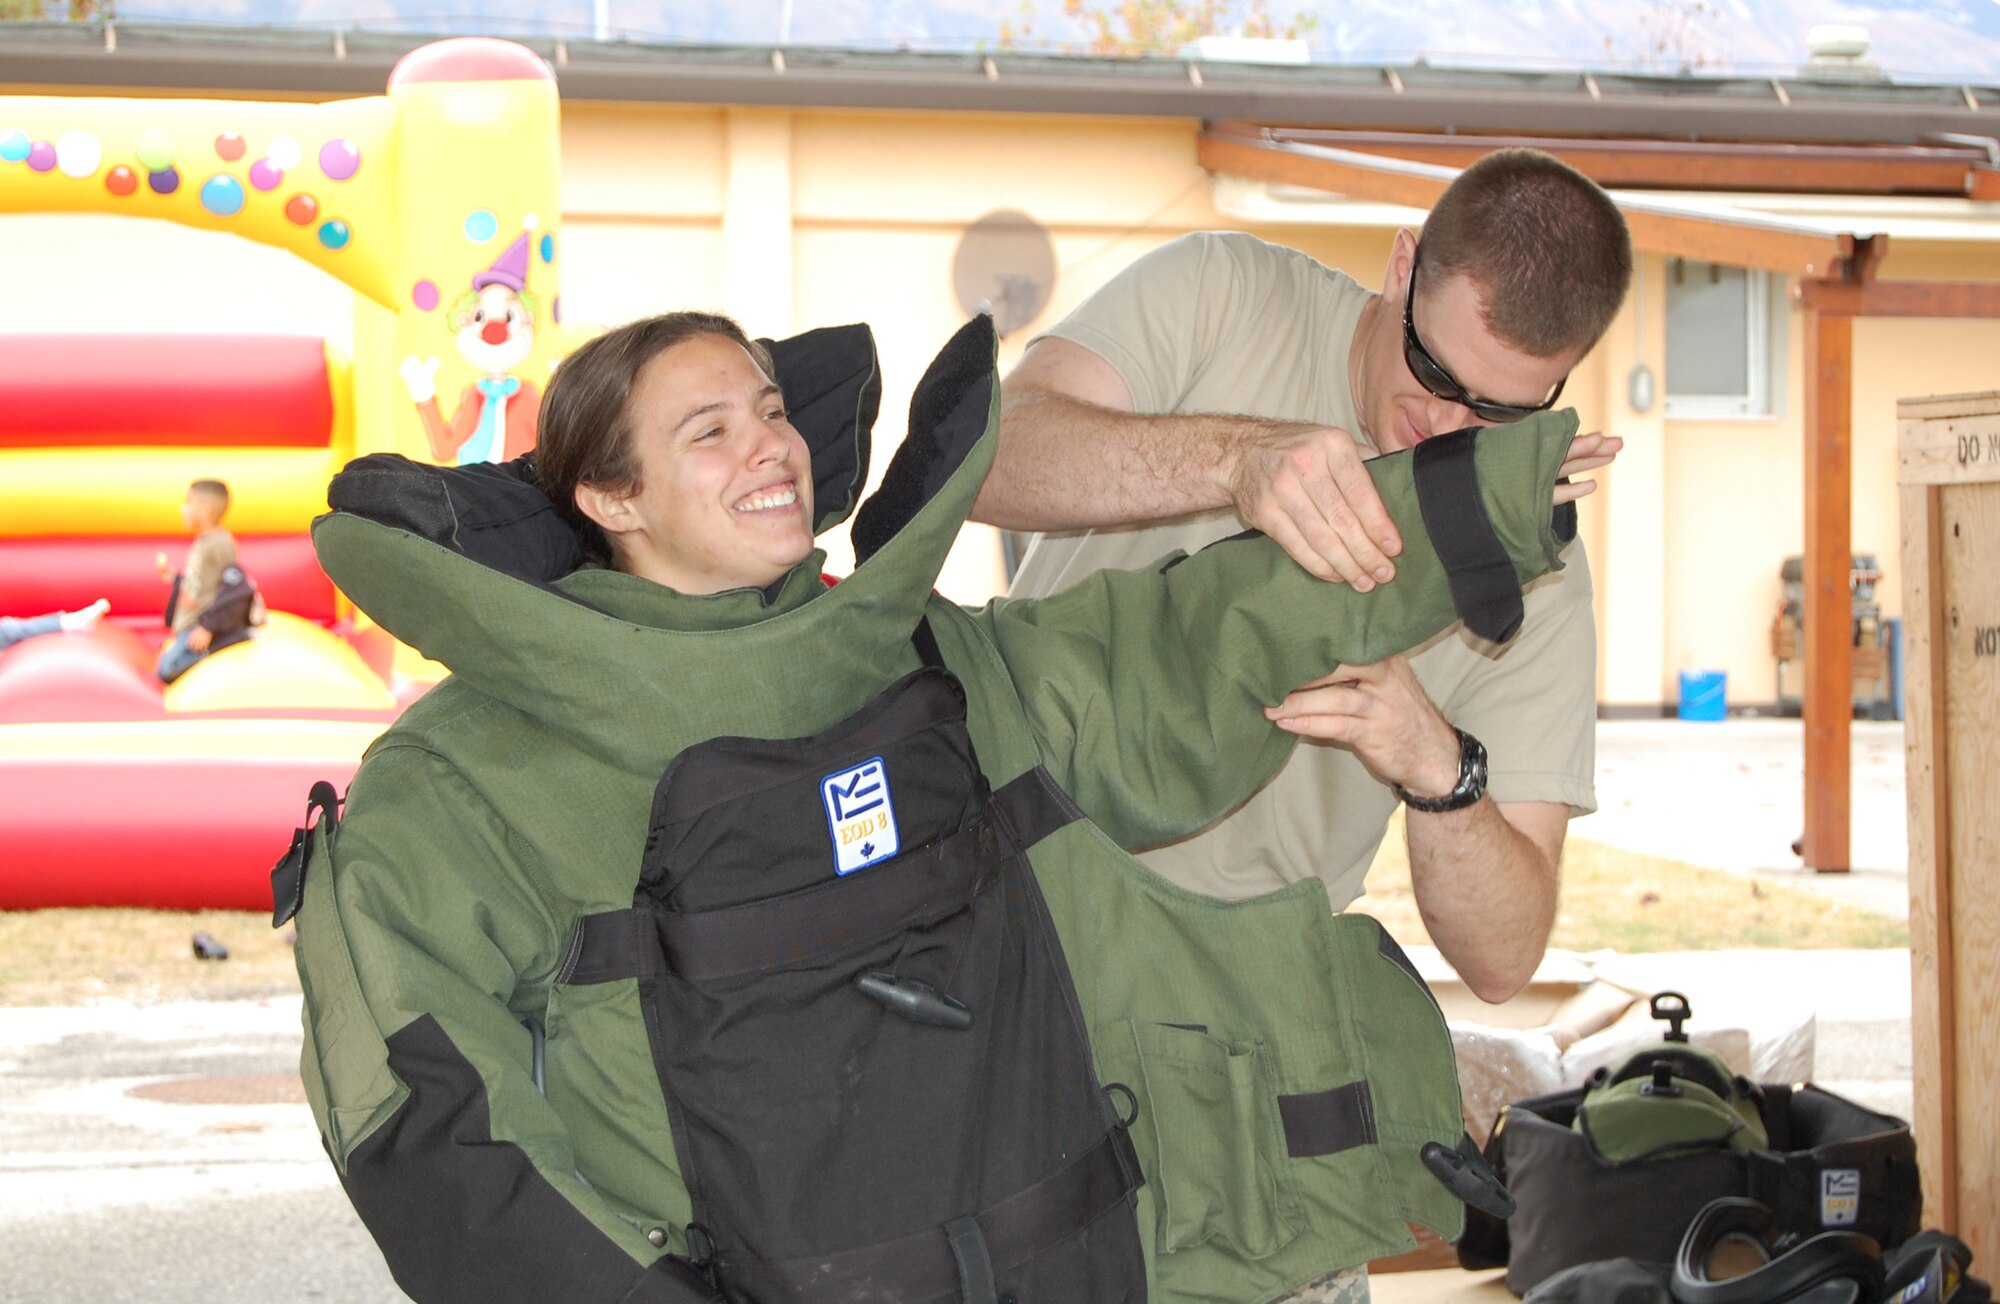 Staff Sgt. Jonathan Eaton of the 31st Civil Engineer Squadron Explosive Ordnance Flight dresses Heidi Lucas, wife of Staff Sgt. Jedd Lucas, in the EOD 8 bomb suit during the Air Force EOD Safety Day Nov. 7. The bomb suit weighs approximately 80 pounds and will protect a wearer from many of the hazards that would otherwise harm an unprotected person. (U.S. Air Force photo/Staff Sgt. Lindsey Maurice)